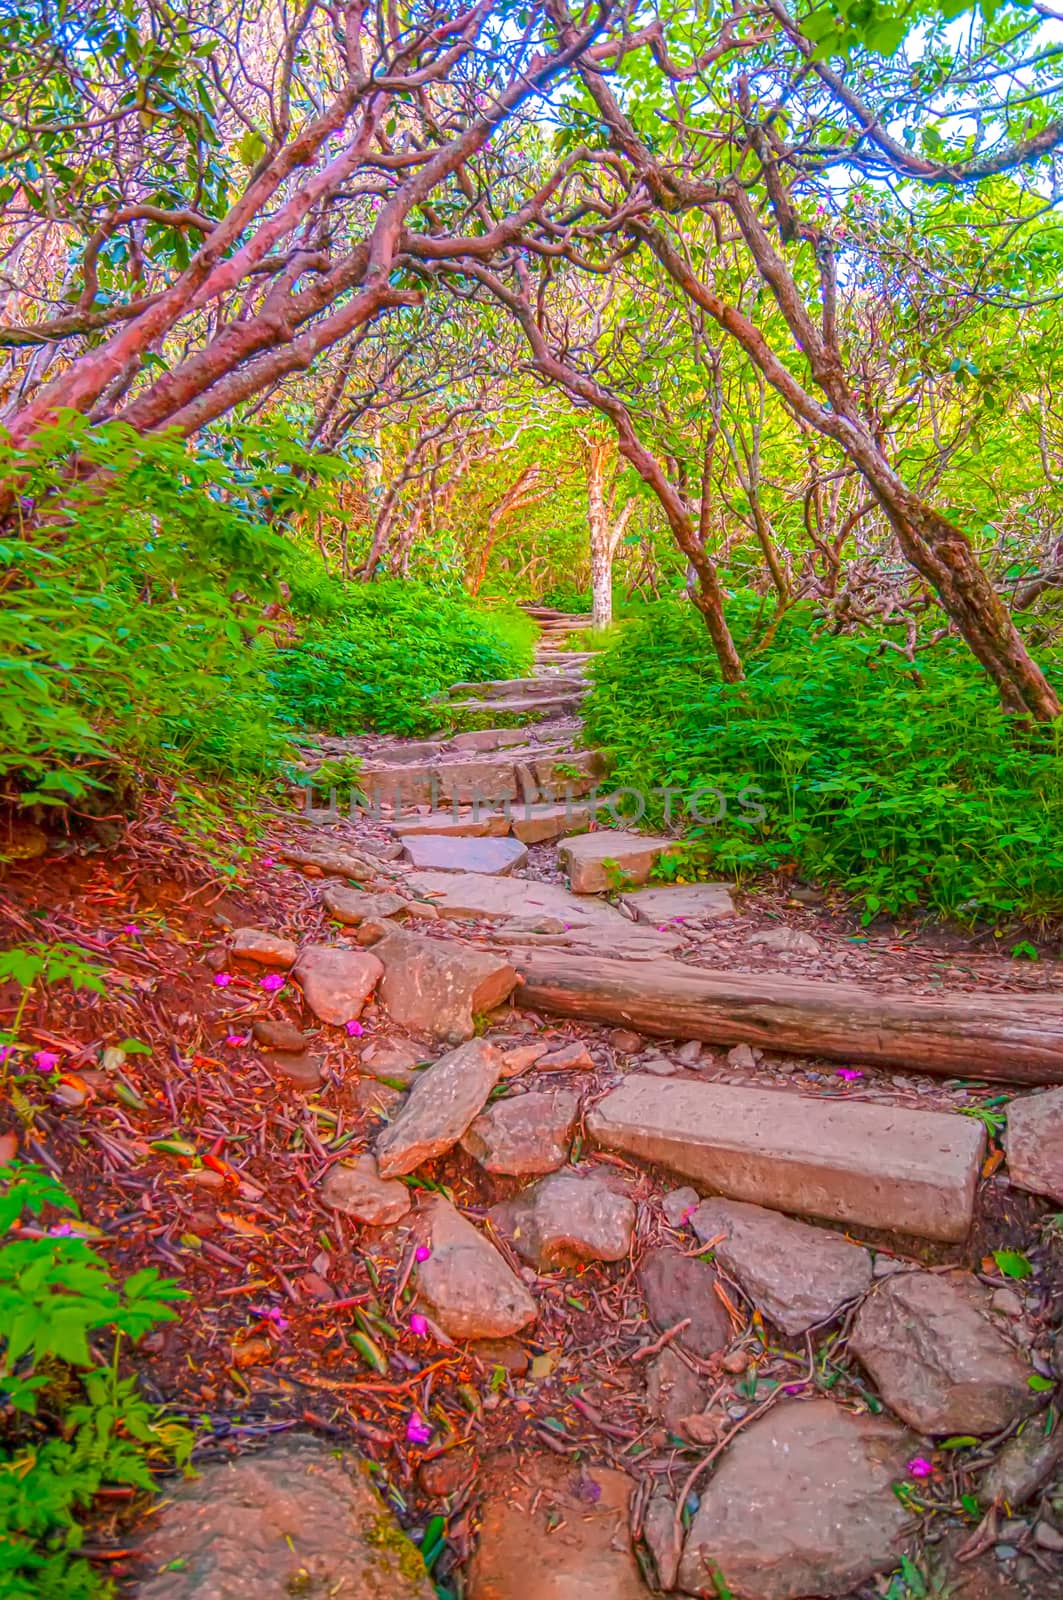 Craggy Garden Trail on an autumn day by digidreamgrafix